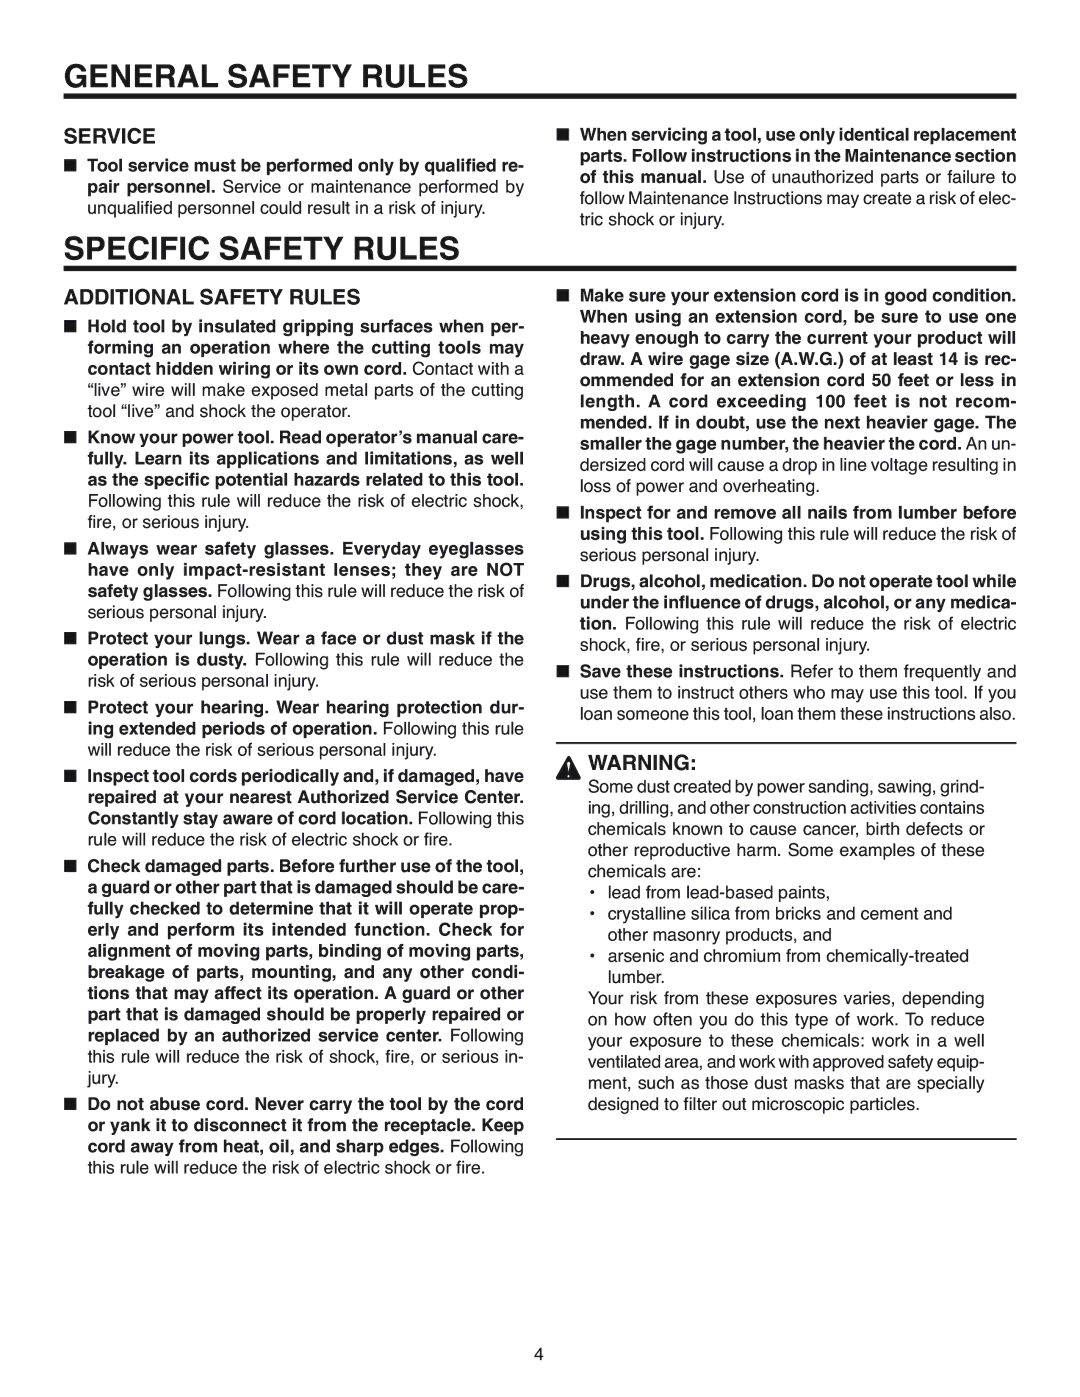 RIDGID R7120 manual Specific Safety Rules, Service, Additional Safety Rules 